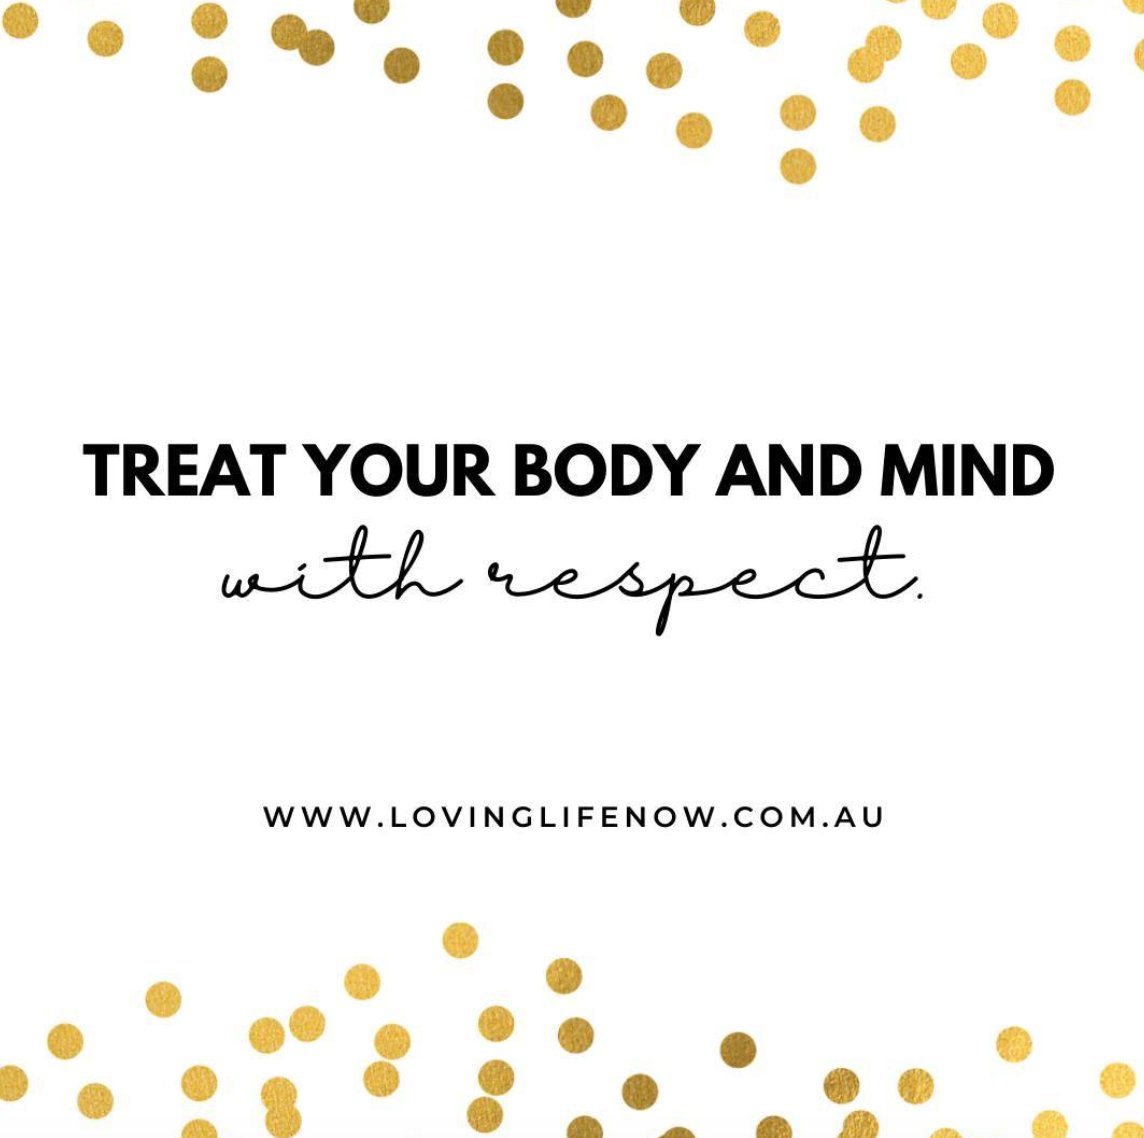 Treat your body and mind with respect
-
-
#LivingLovingLife
#OnlineIncomeOpportunity #WorkFromAnywhere #OnlineBusinessSolution
#SimonAndLeeAnne #LifestyleLoveAndBeyond
#LaptopLifestyle #PortableOnlineBusiness
#SimonHaggard #LeeAnneHaggard #LovingLifeNow